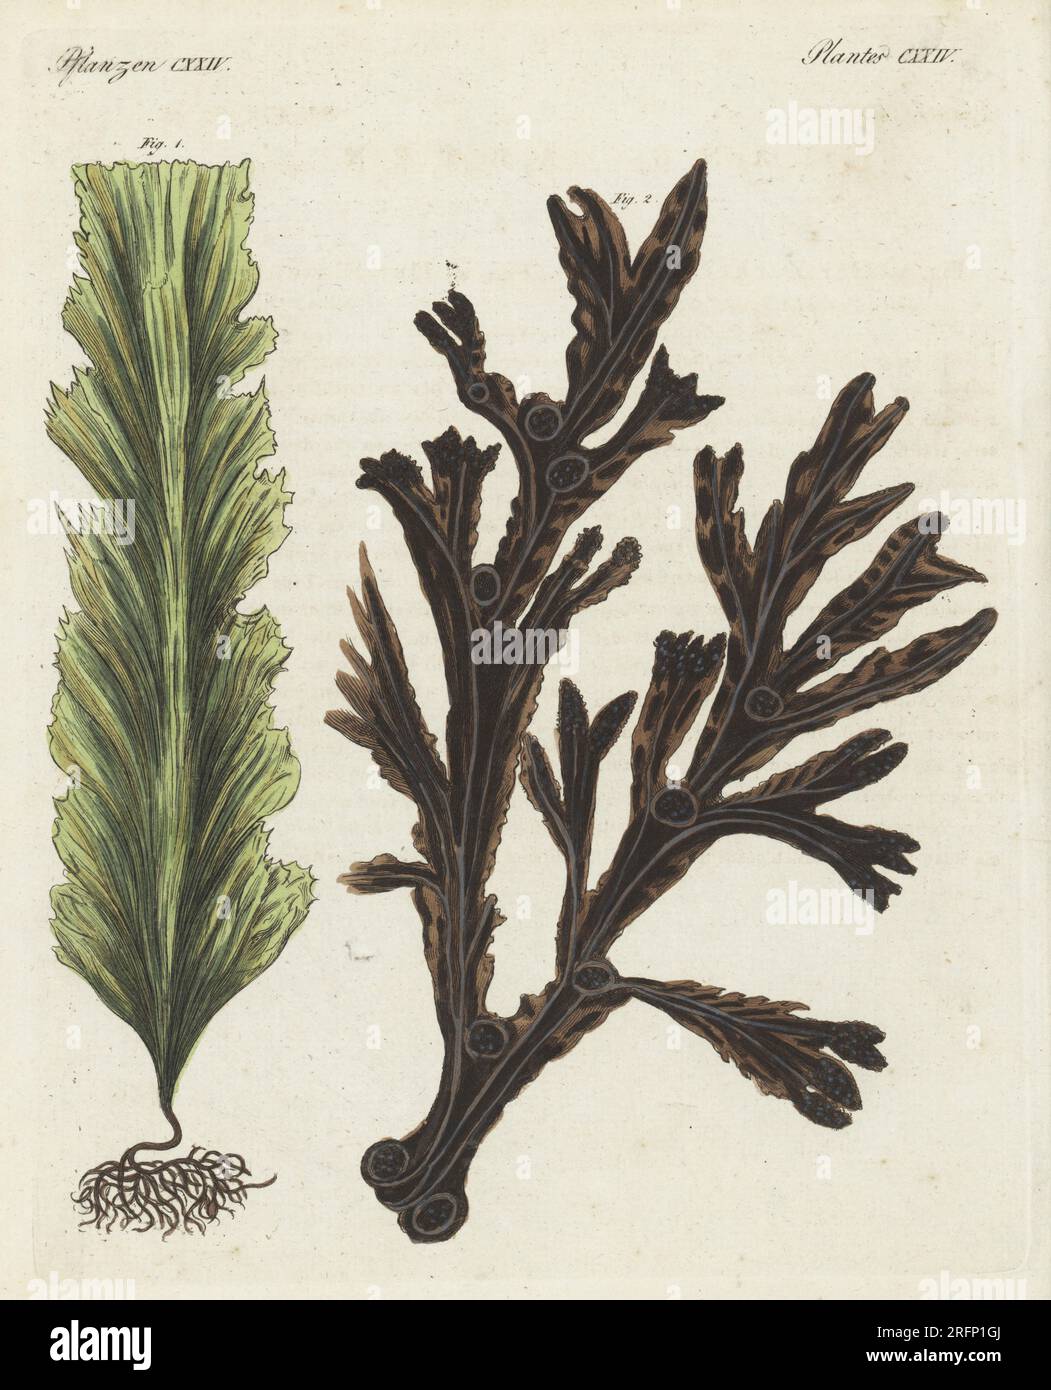 Sugar kelp or devil's apron, Saccharina latissima 1, and bladderwrack,  Fucus vesiculosus, source of iodine 2. Handcoloured copperplate engraving  from Carl Bertuch's Bilderbuch fur Kinder (Picture Book for Children),  Weimar, 1810. A